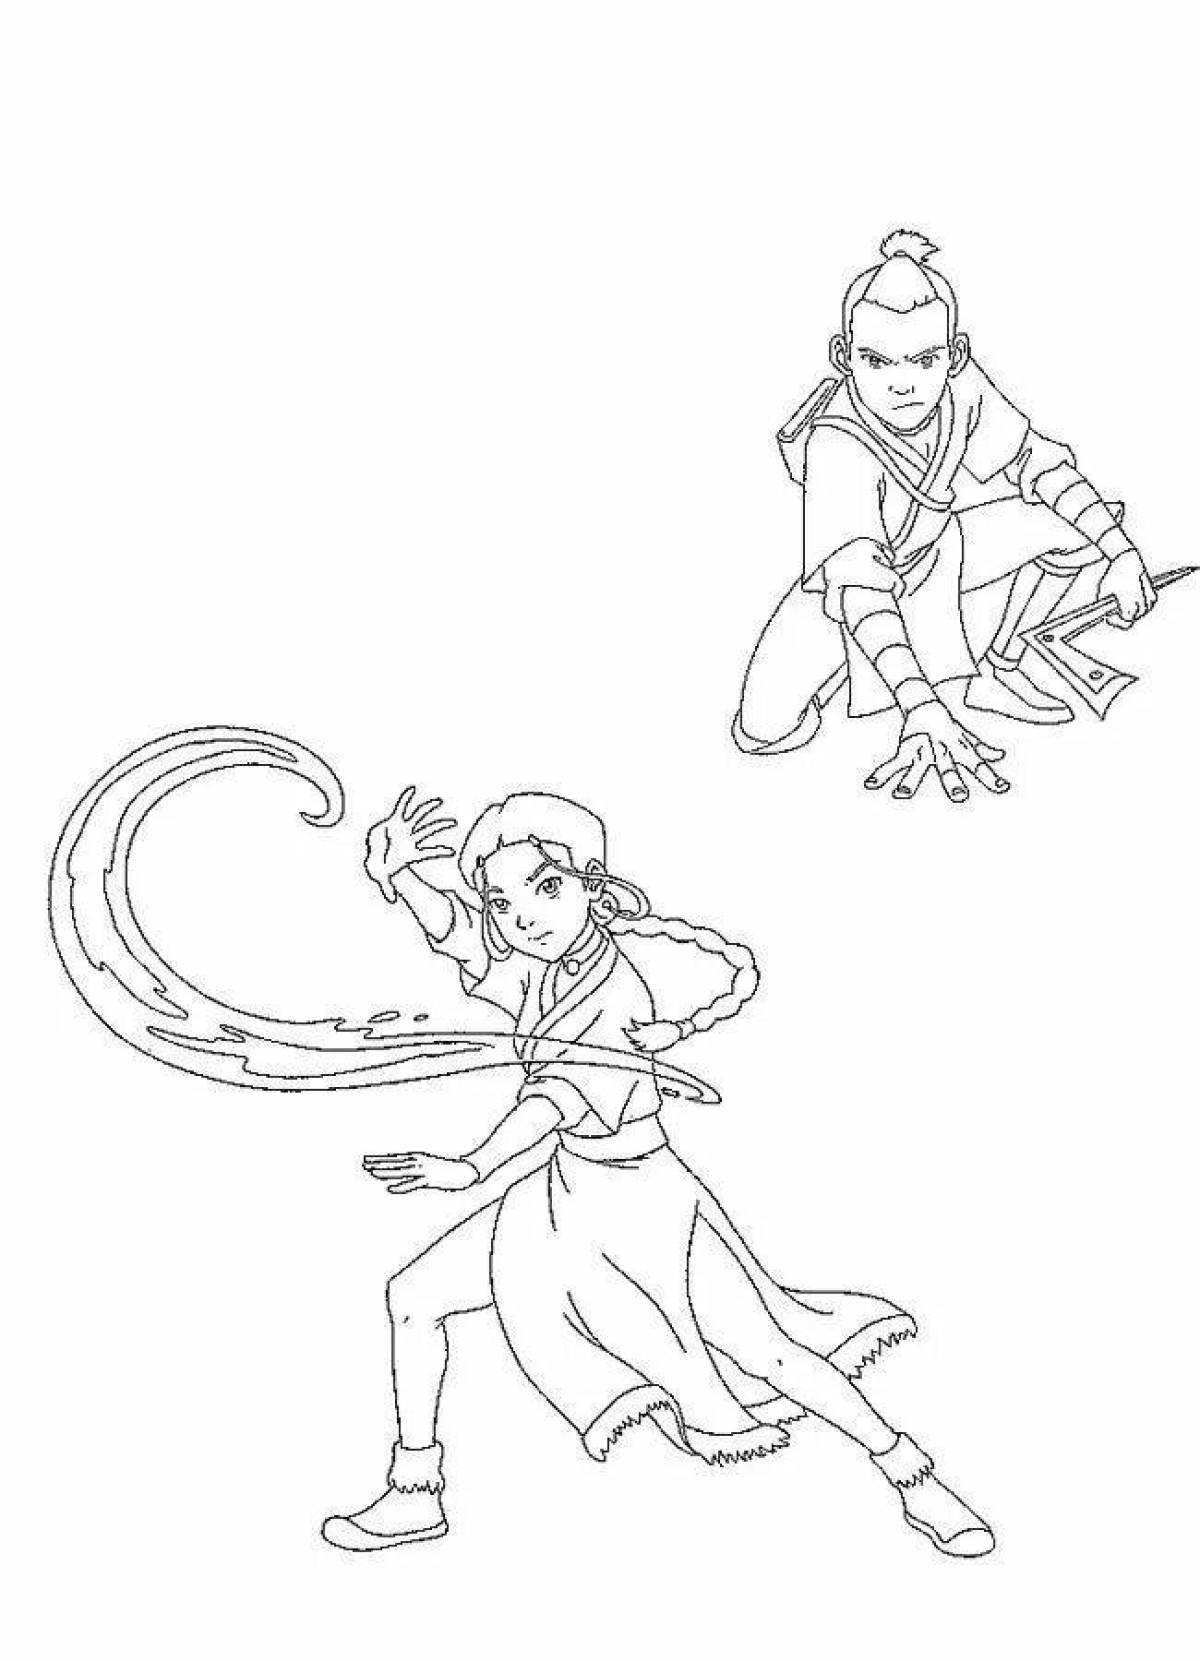 Charming waterway avatar coloring page